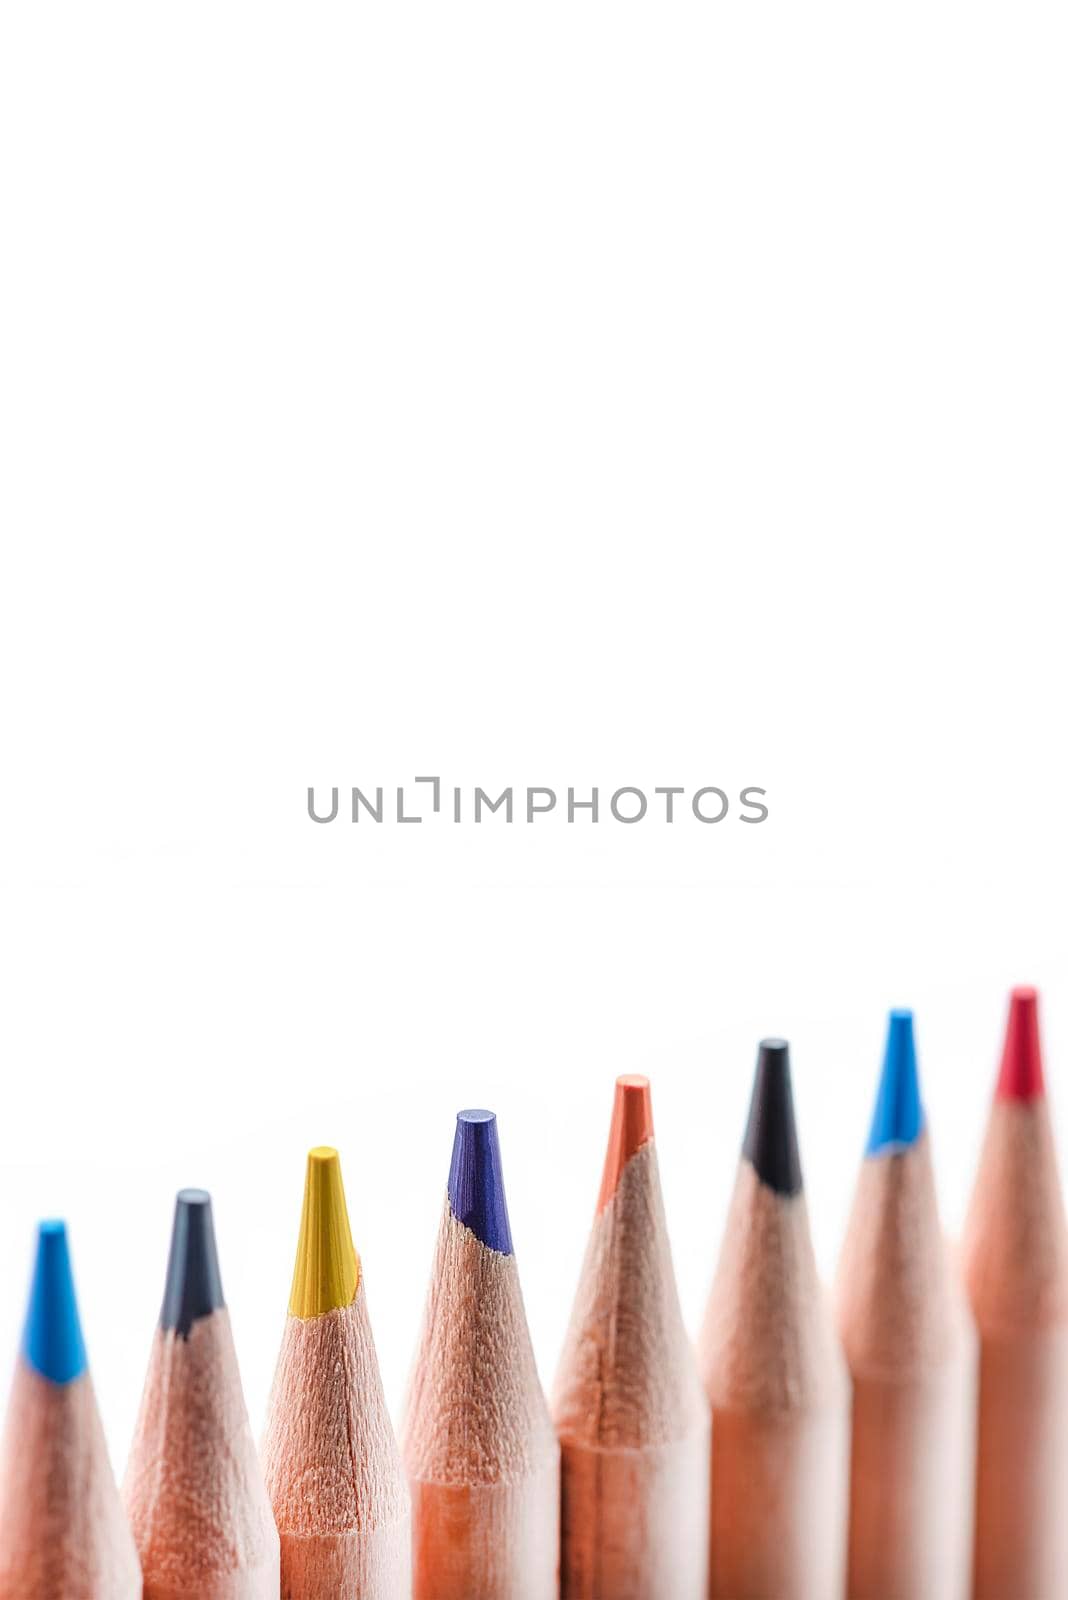 Isolate of multicolored wooden pencils. Pencils of different colors ,arranged in a rowstand out against a uniform white background, for insertion into a project or for printing a banner or label